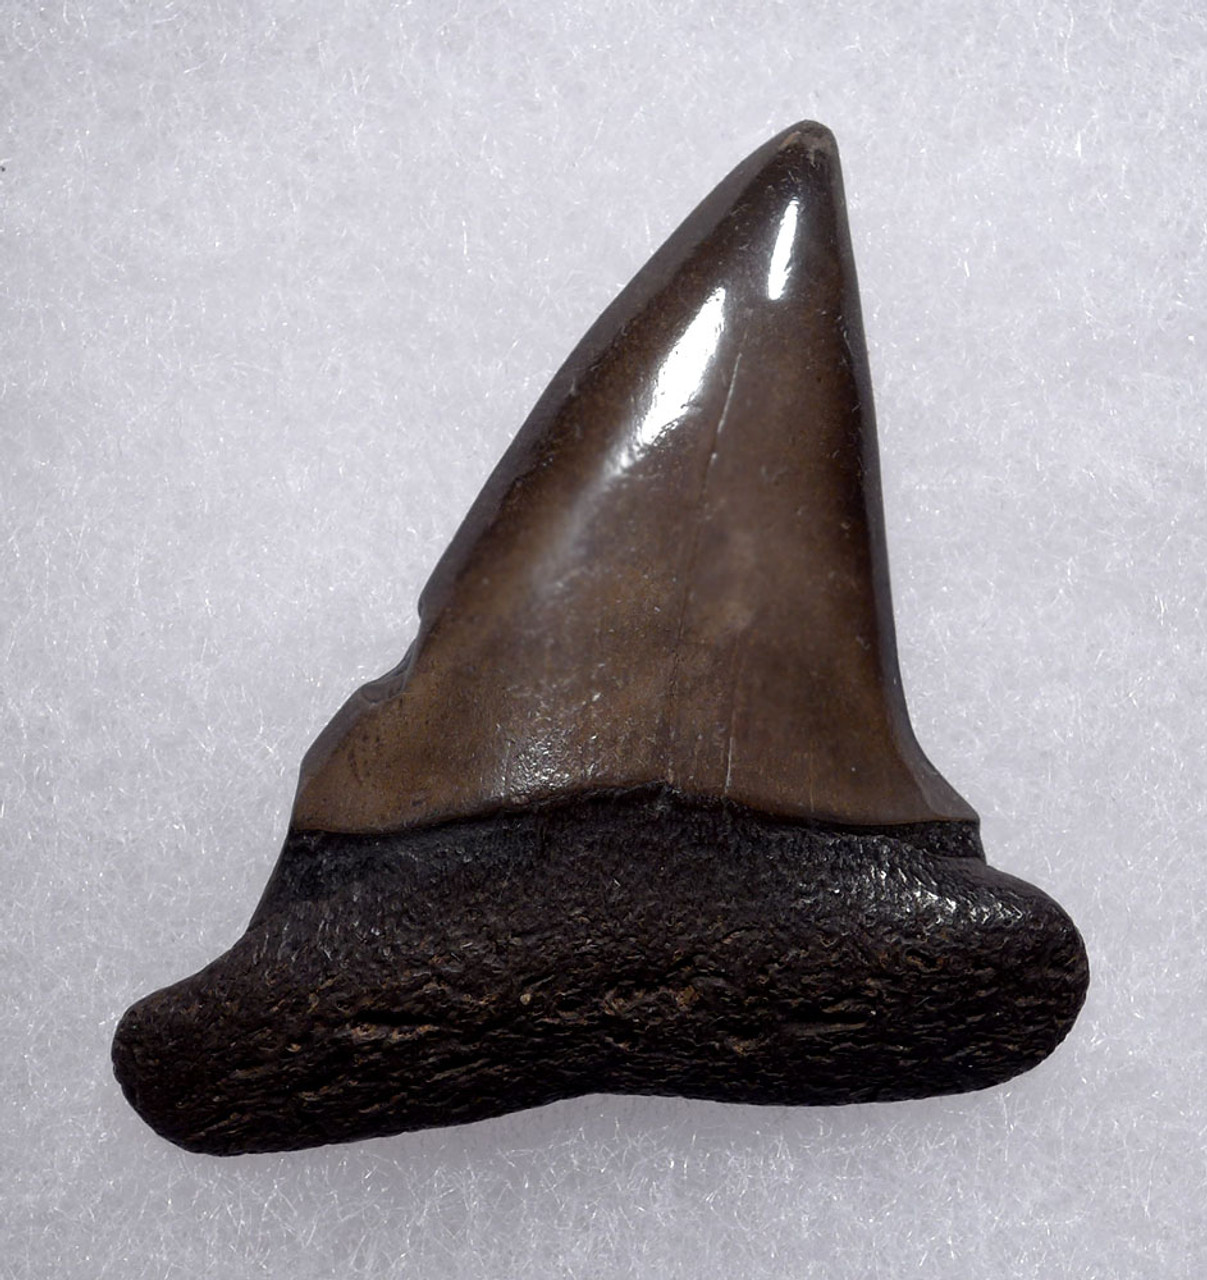 2.1 INCH USA FOSSIL SHARK TOOTH OF ISURUS HASTALIS BROAD TOOTH MAKO WITH CHATOYANT BRONZE ENAMEL  *SHX161